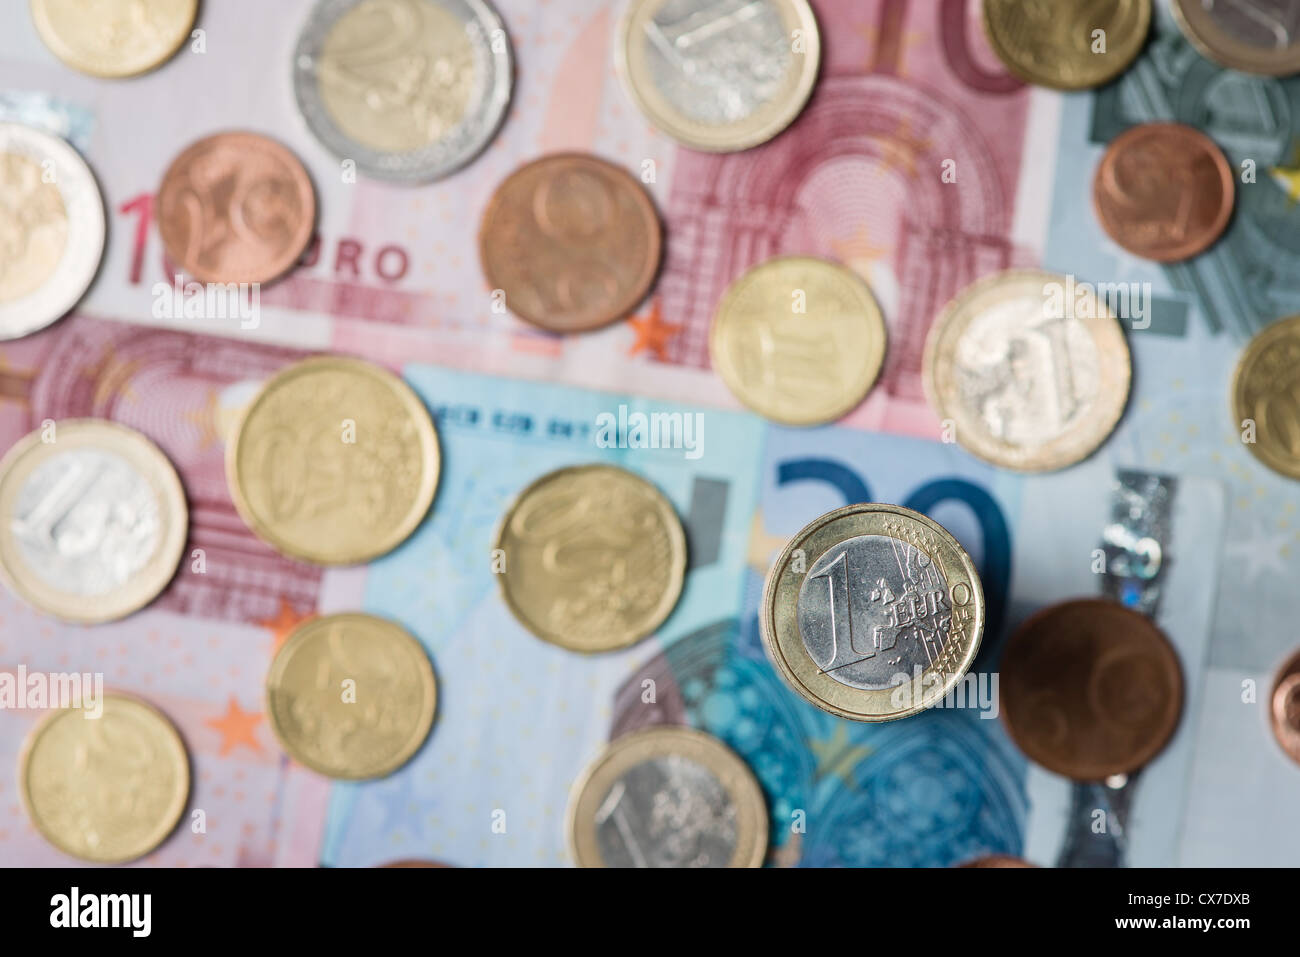 detail of one euro coin, other coins and notes in background Stock Photo